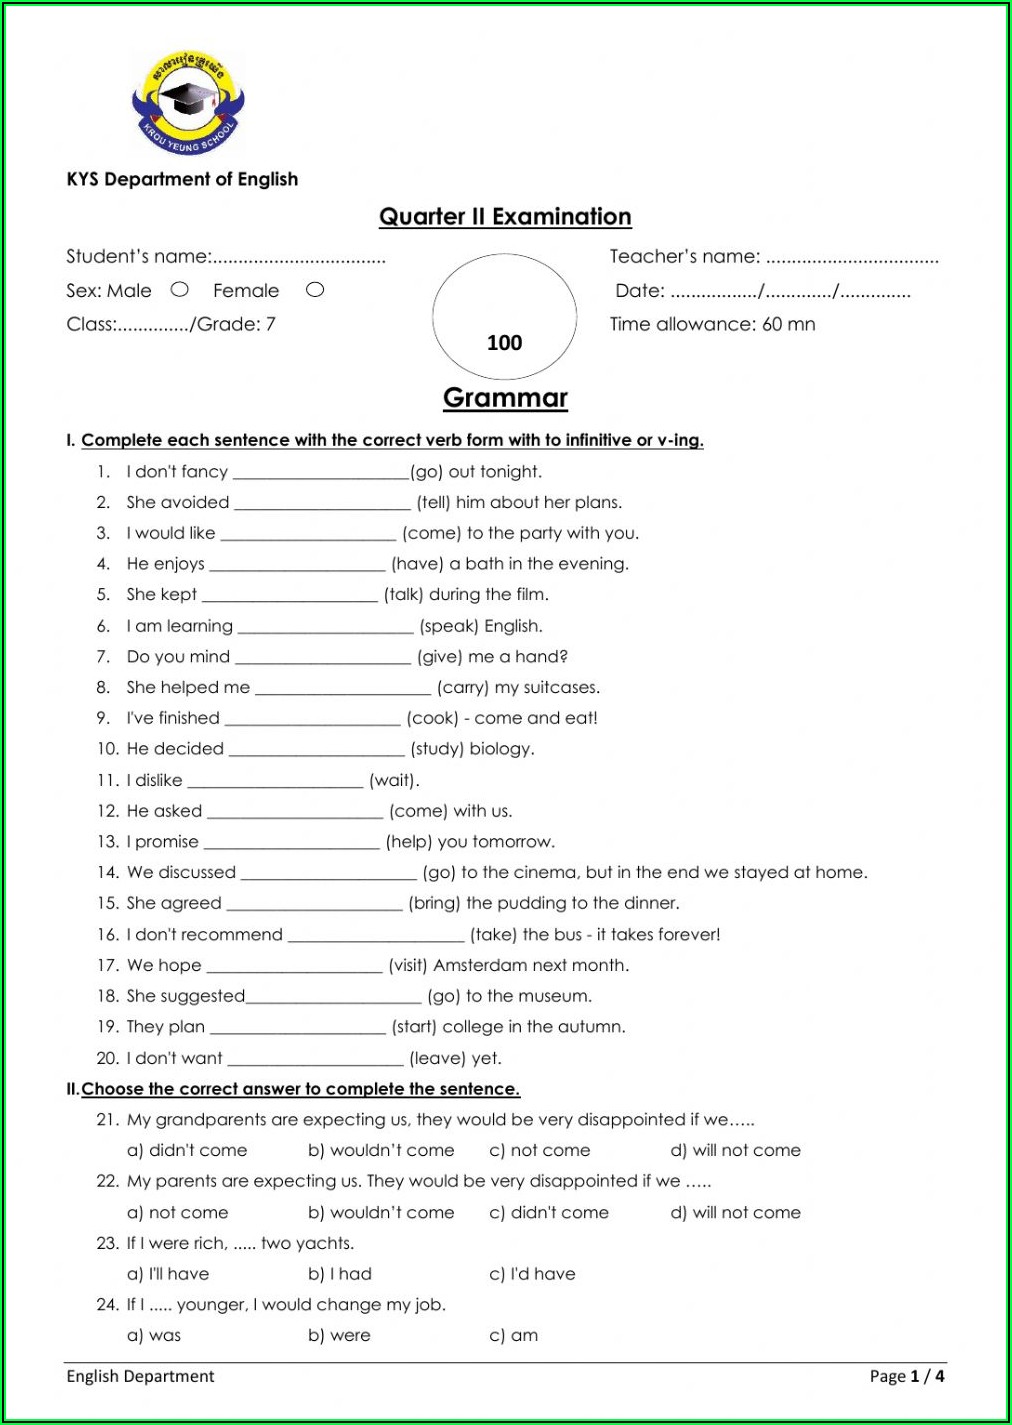 Cbse Grade 7 English Grammar Worksheets With Answers